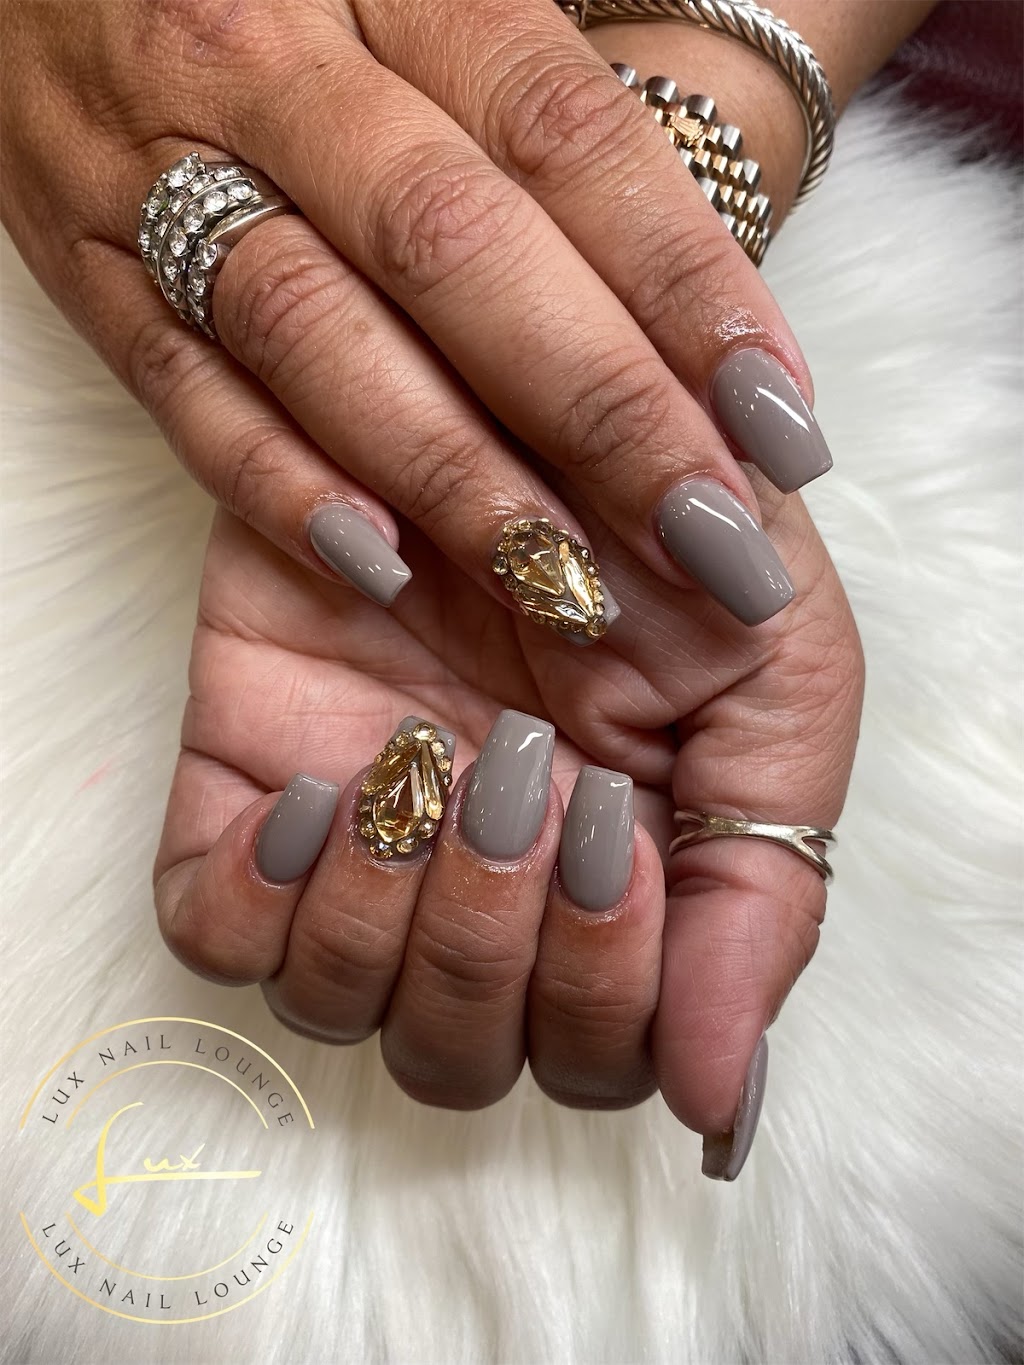 Lux Nail Lounge | 1949 County Rd 419 Ste 1231, Oviedo, FL 32766 | Phone: (321) 765-4778